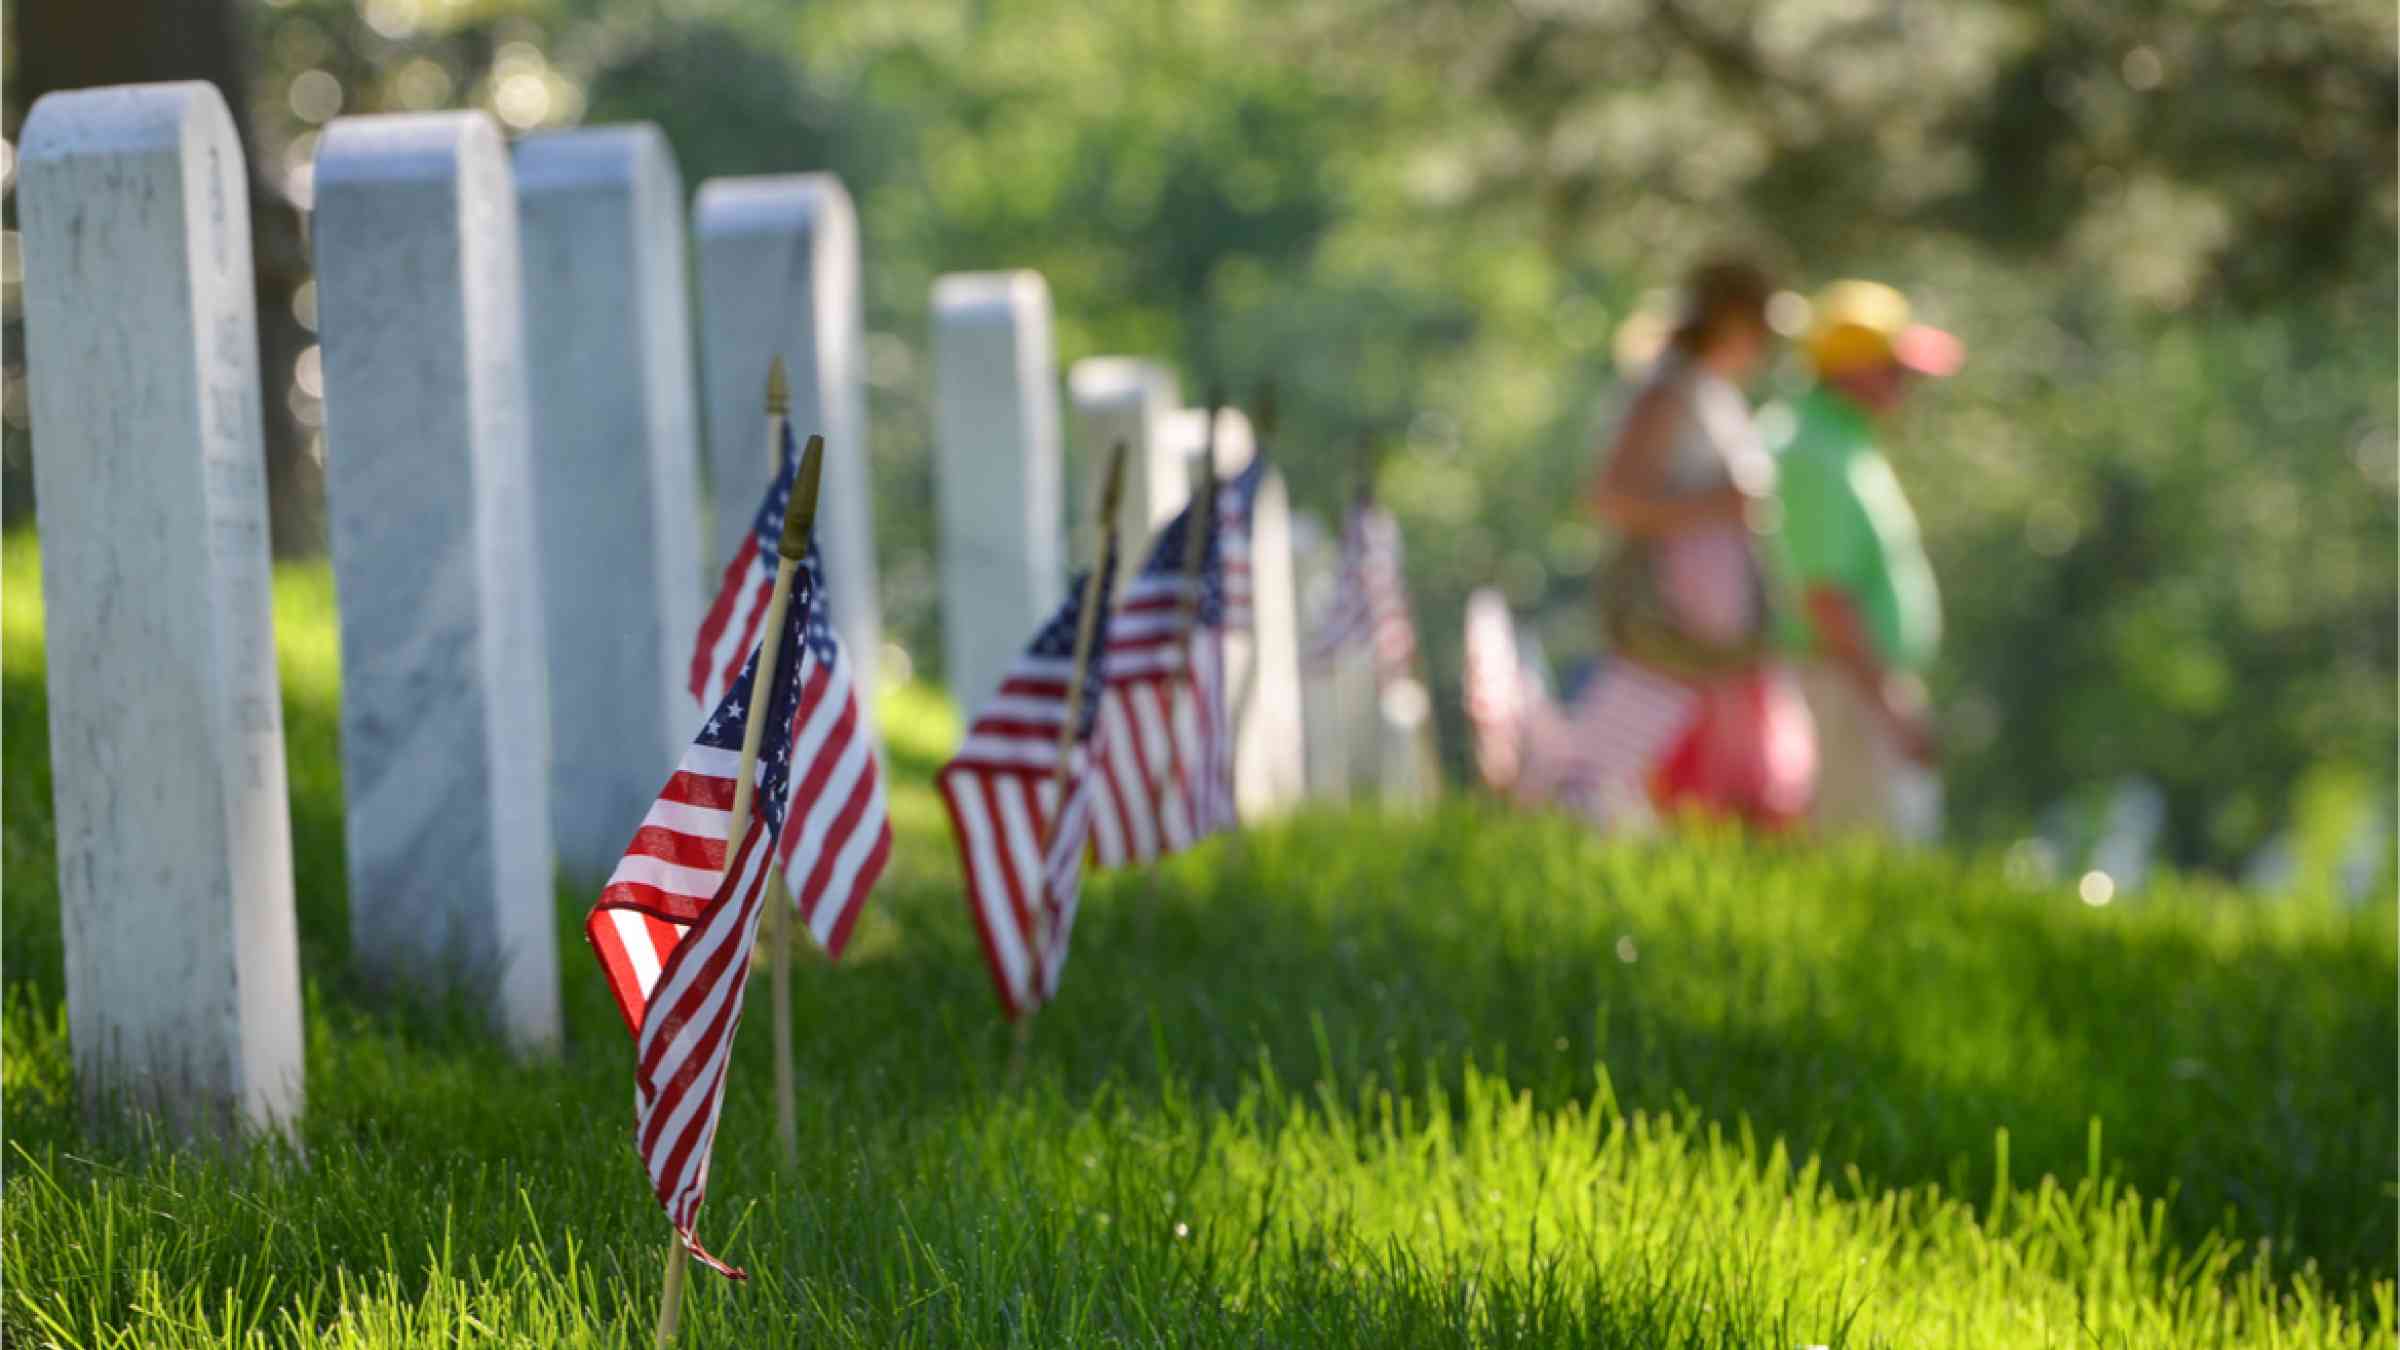 United States National flags ant headstones in National cemetery